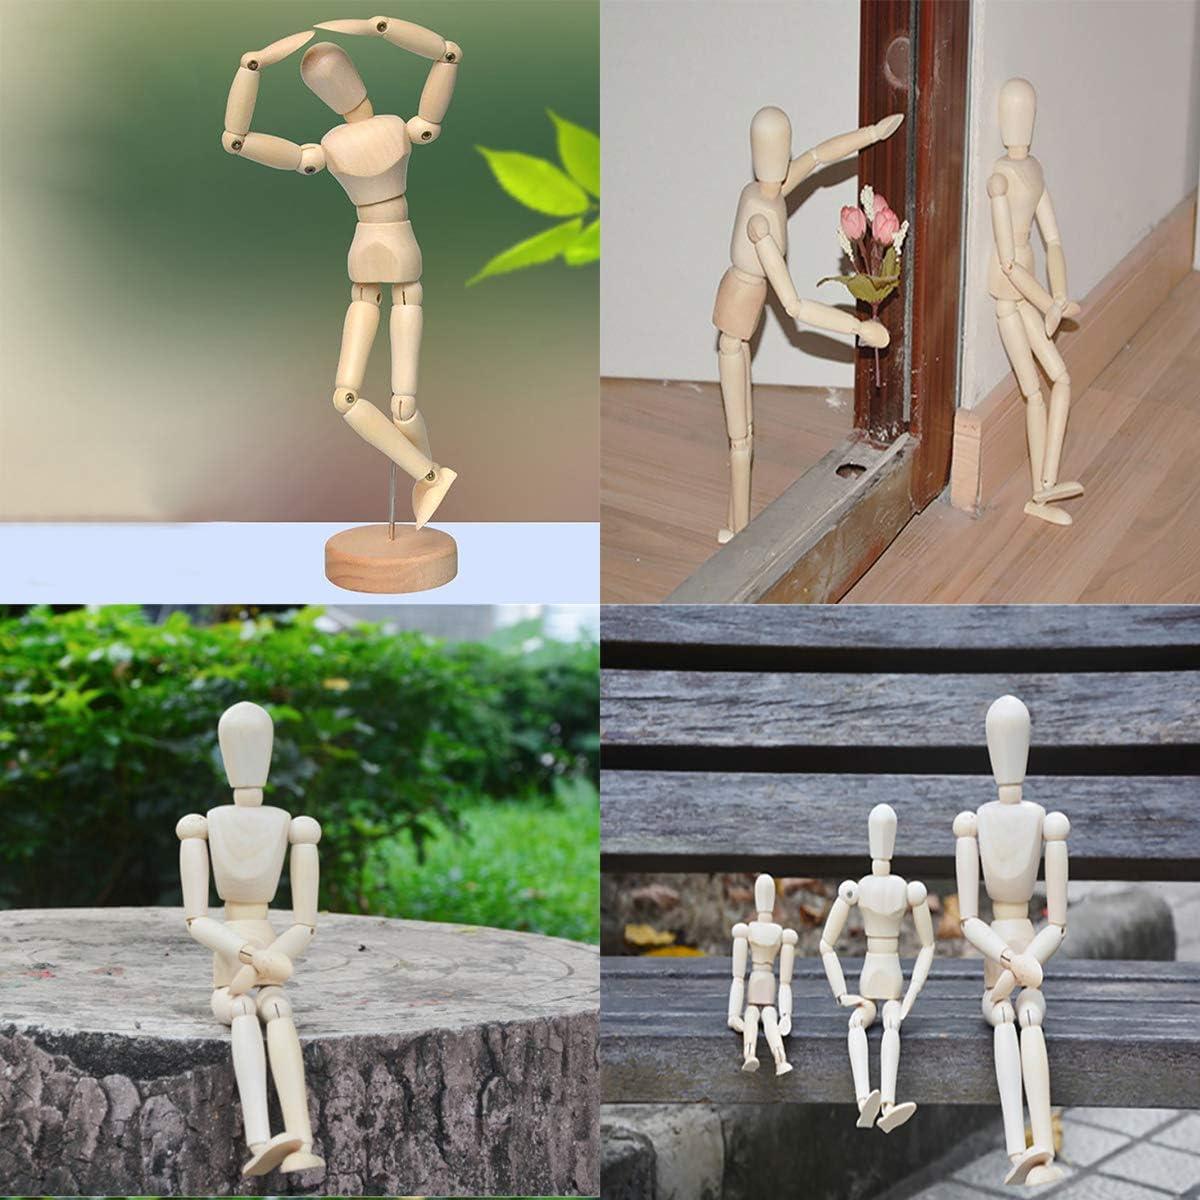 Artist Wooden Manikin Mannequin Sketching Lay Figure Drawing Model Aid Human Figure Artist Draw Painting Model Mannequin Jointed Doll for Art